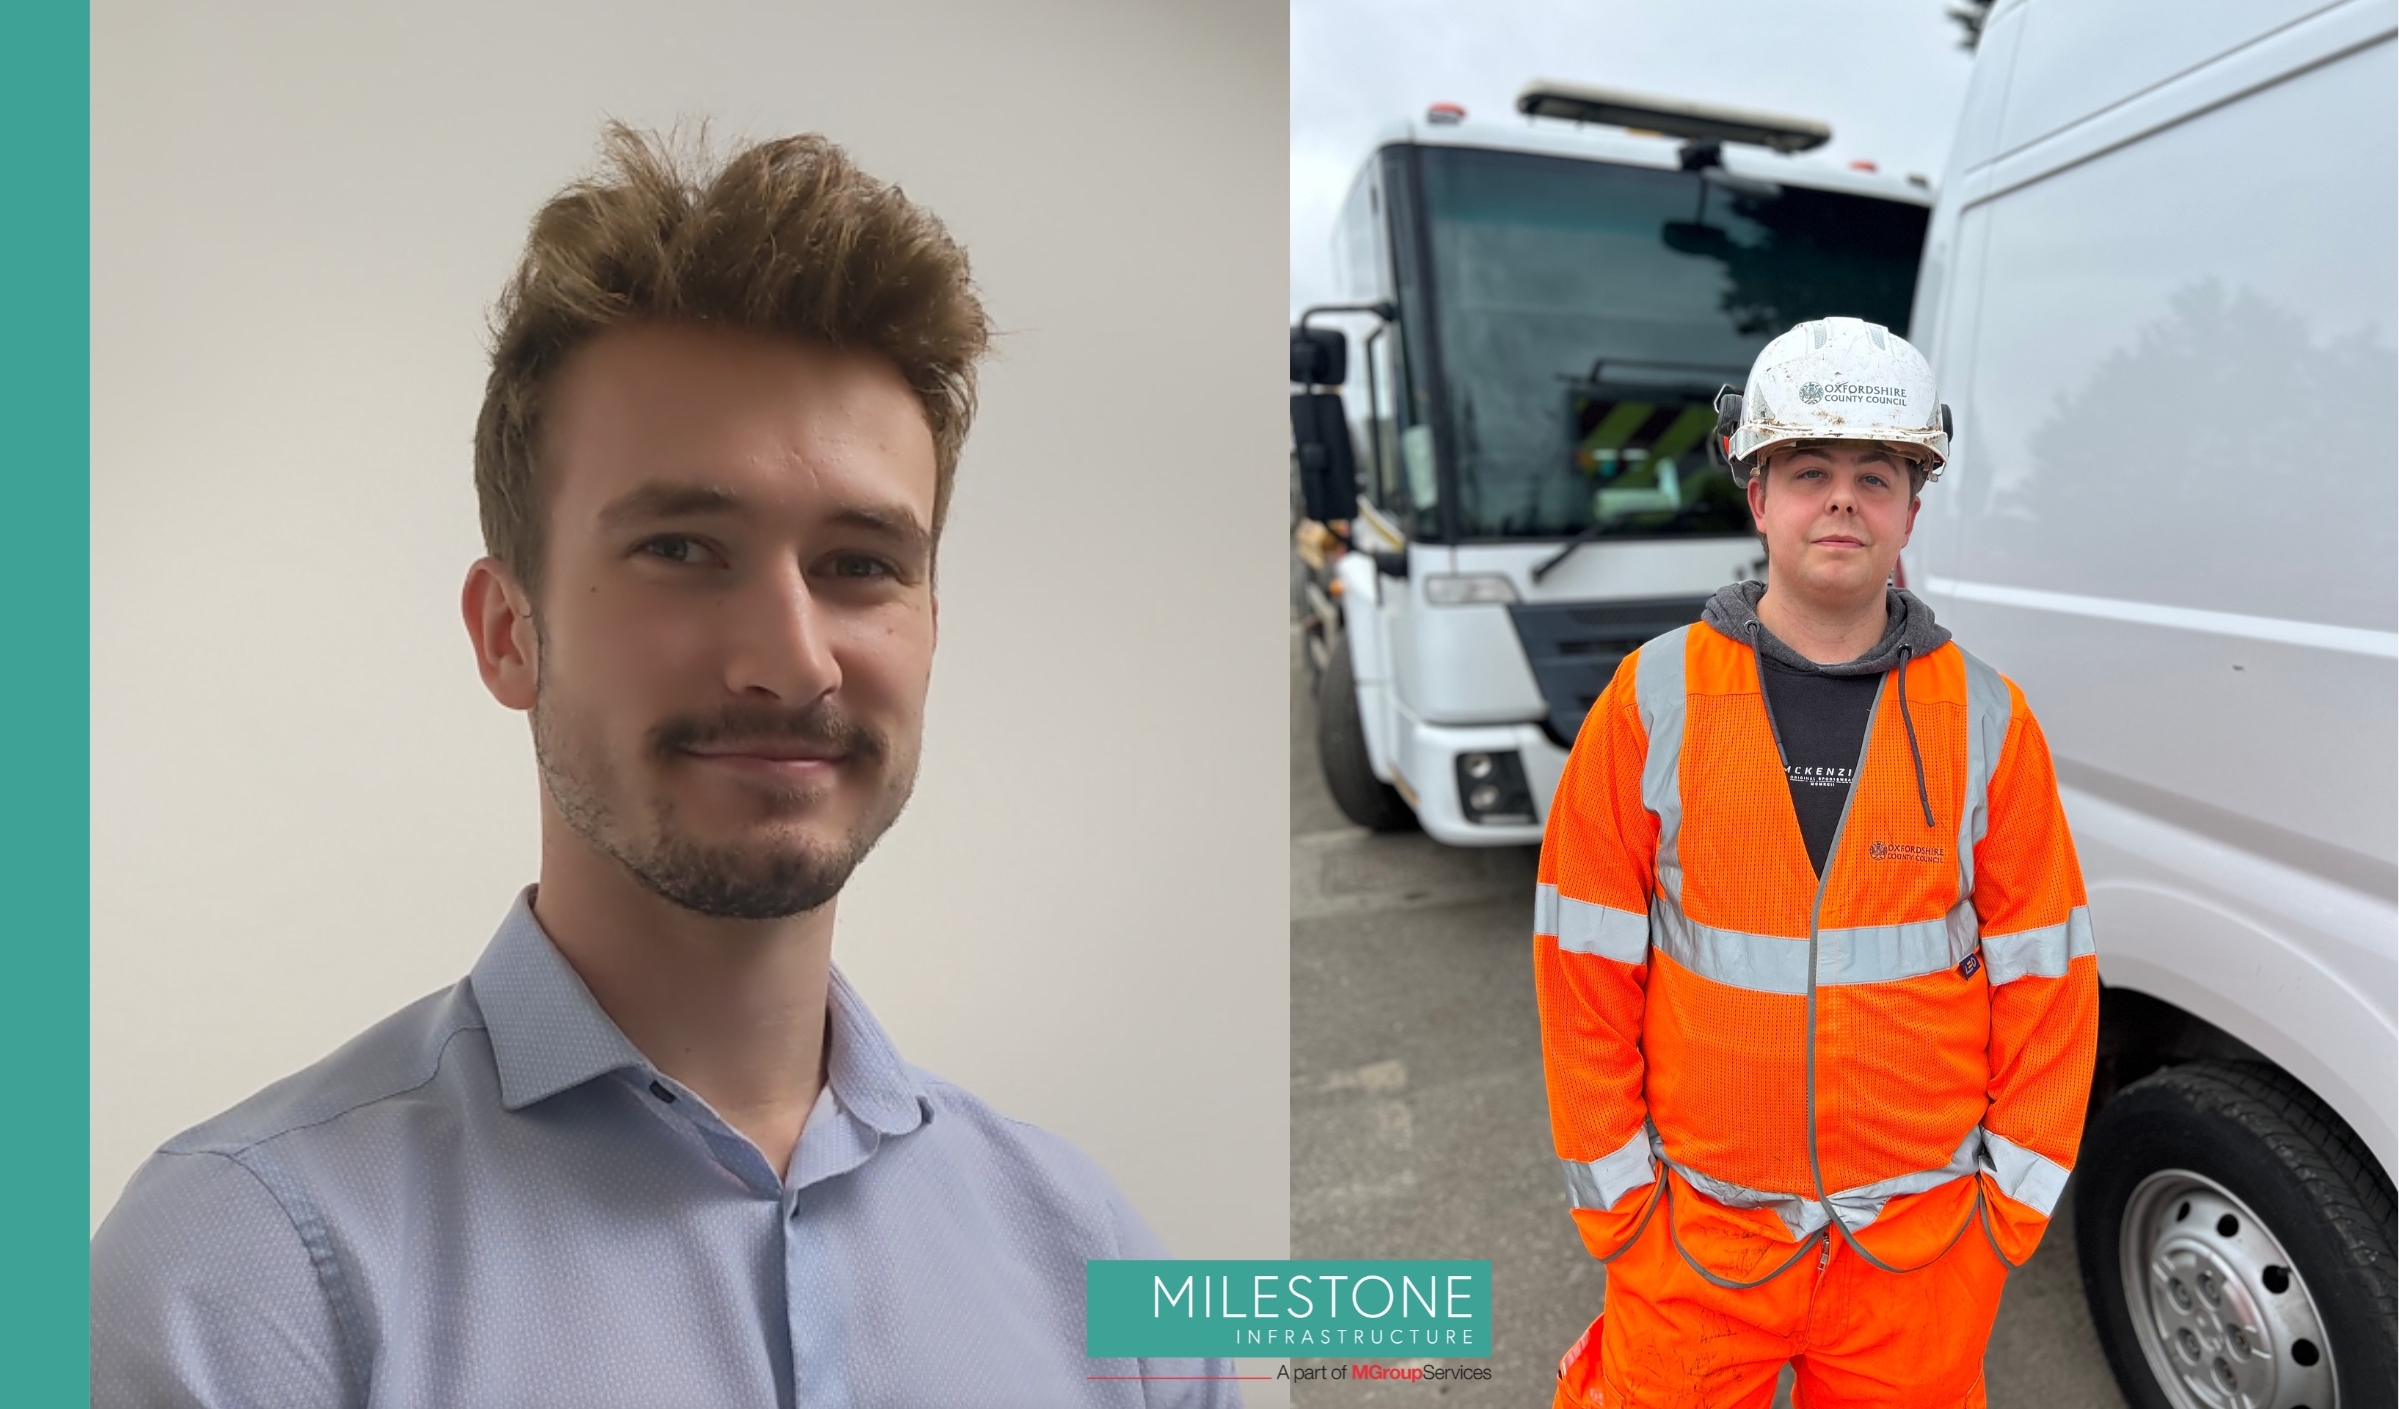 Milestone Infrastructure shortlisted in THREE categories in the Oxfordshire Apprenticeship Awards